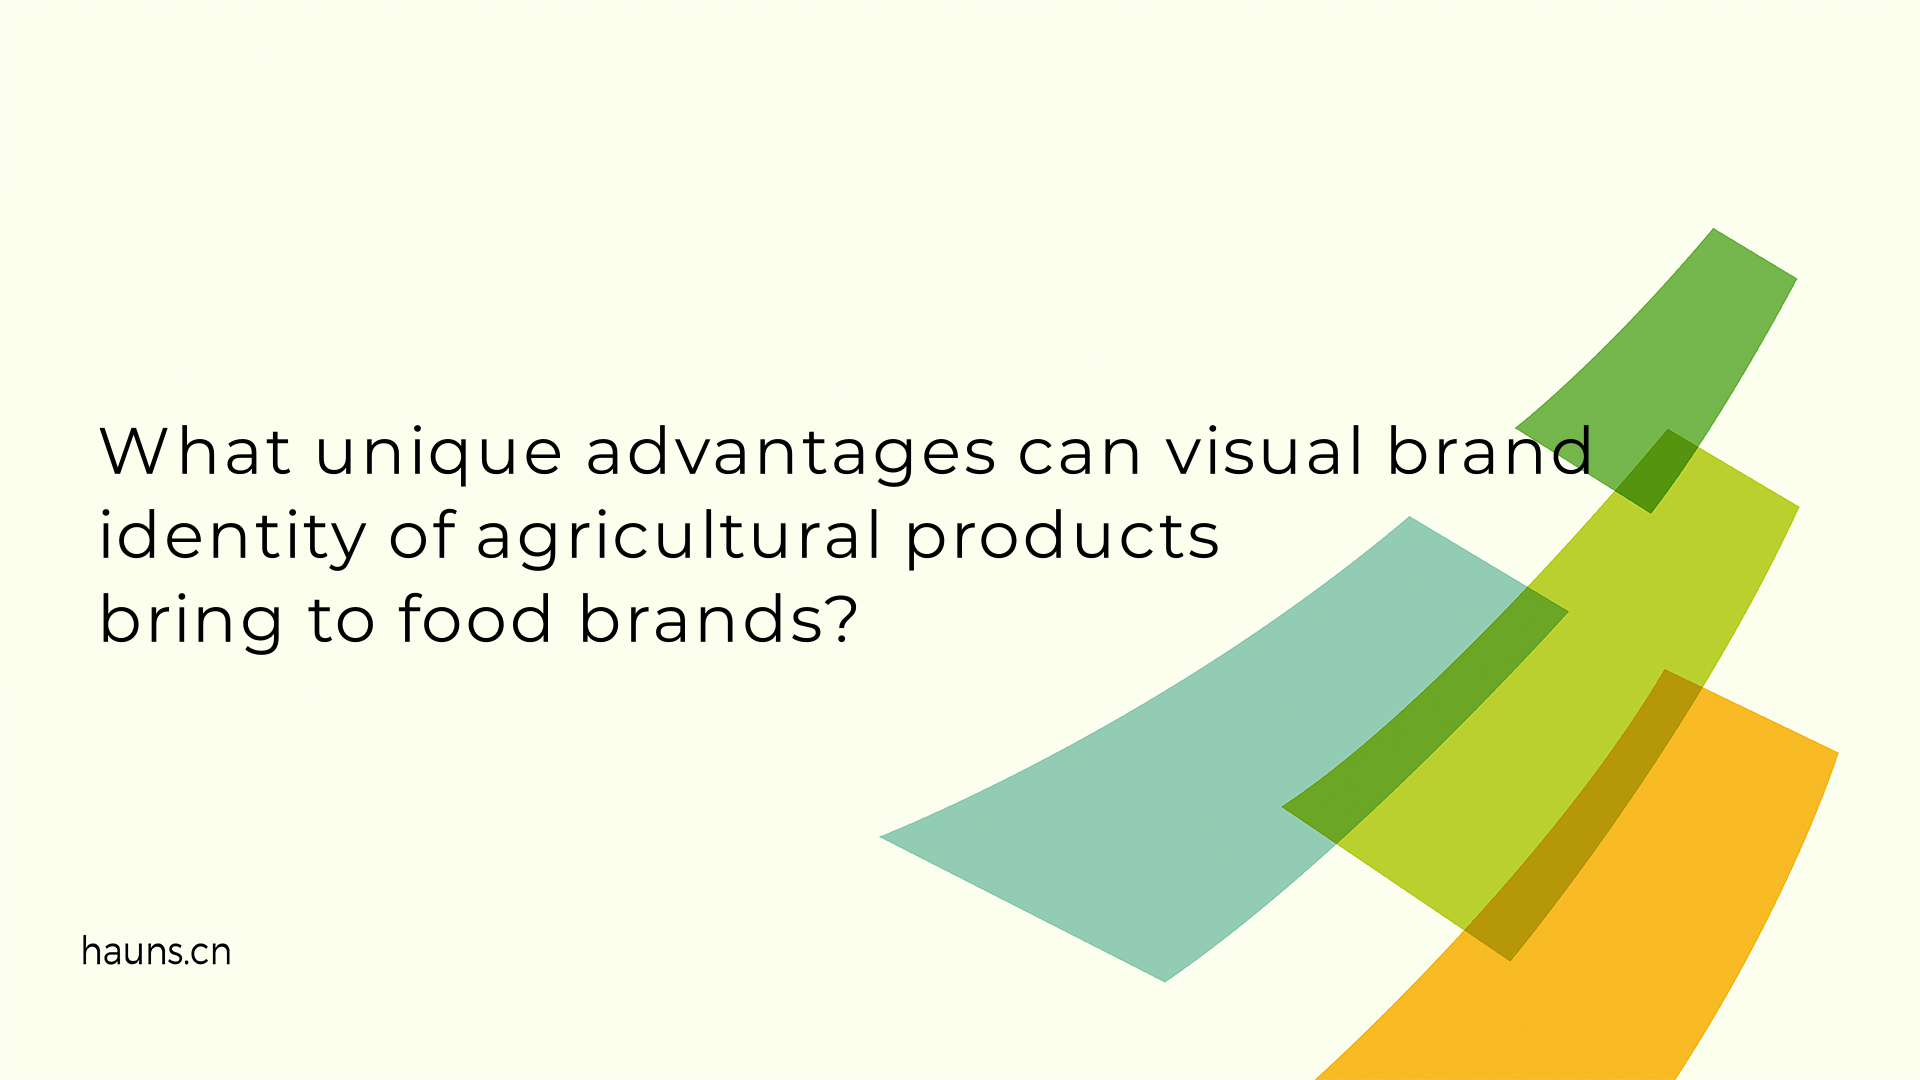 What unique advantages can visual brand identity of agricultural products bring to food brands?